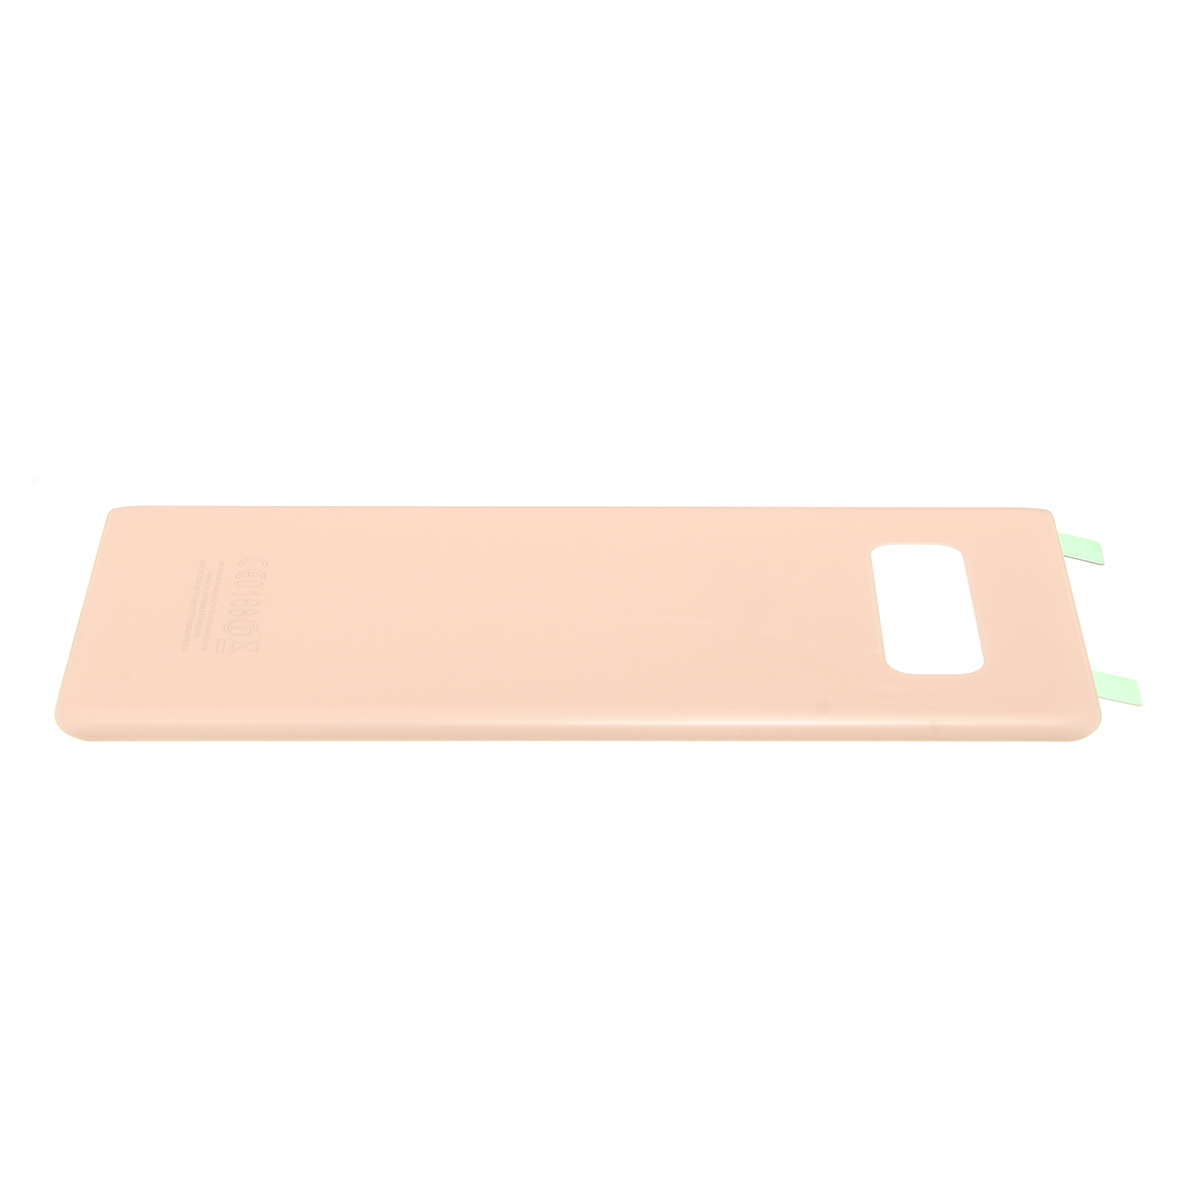 Back-Glass-Battery-Cover-With-Camera-Lens-Frame-for-Samsung-Galaxy-Note-8-1330642